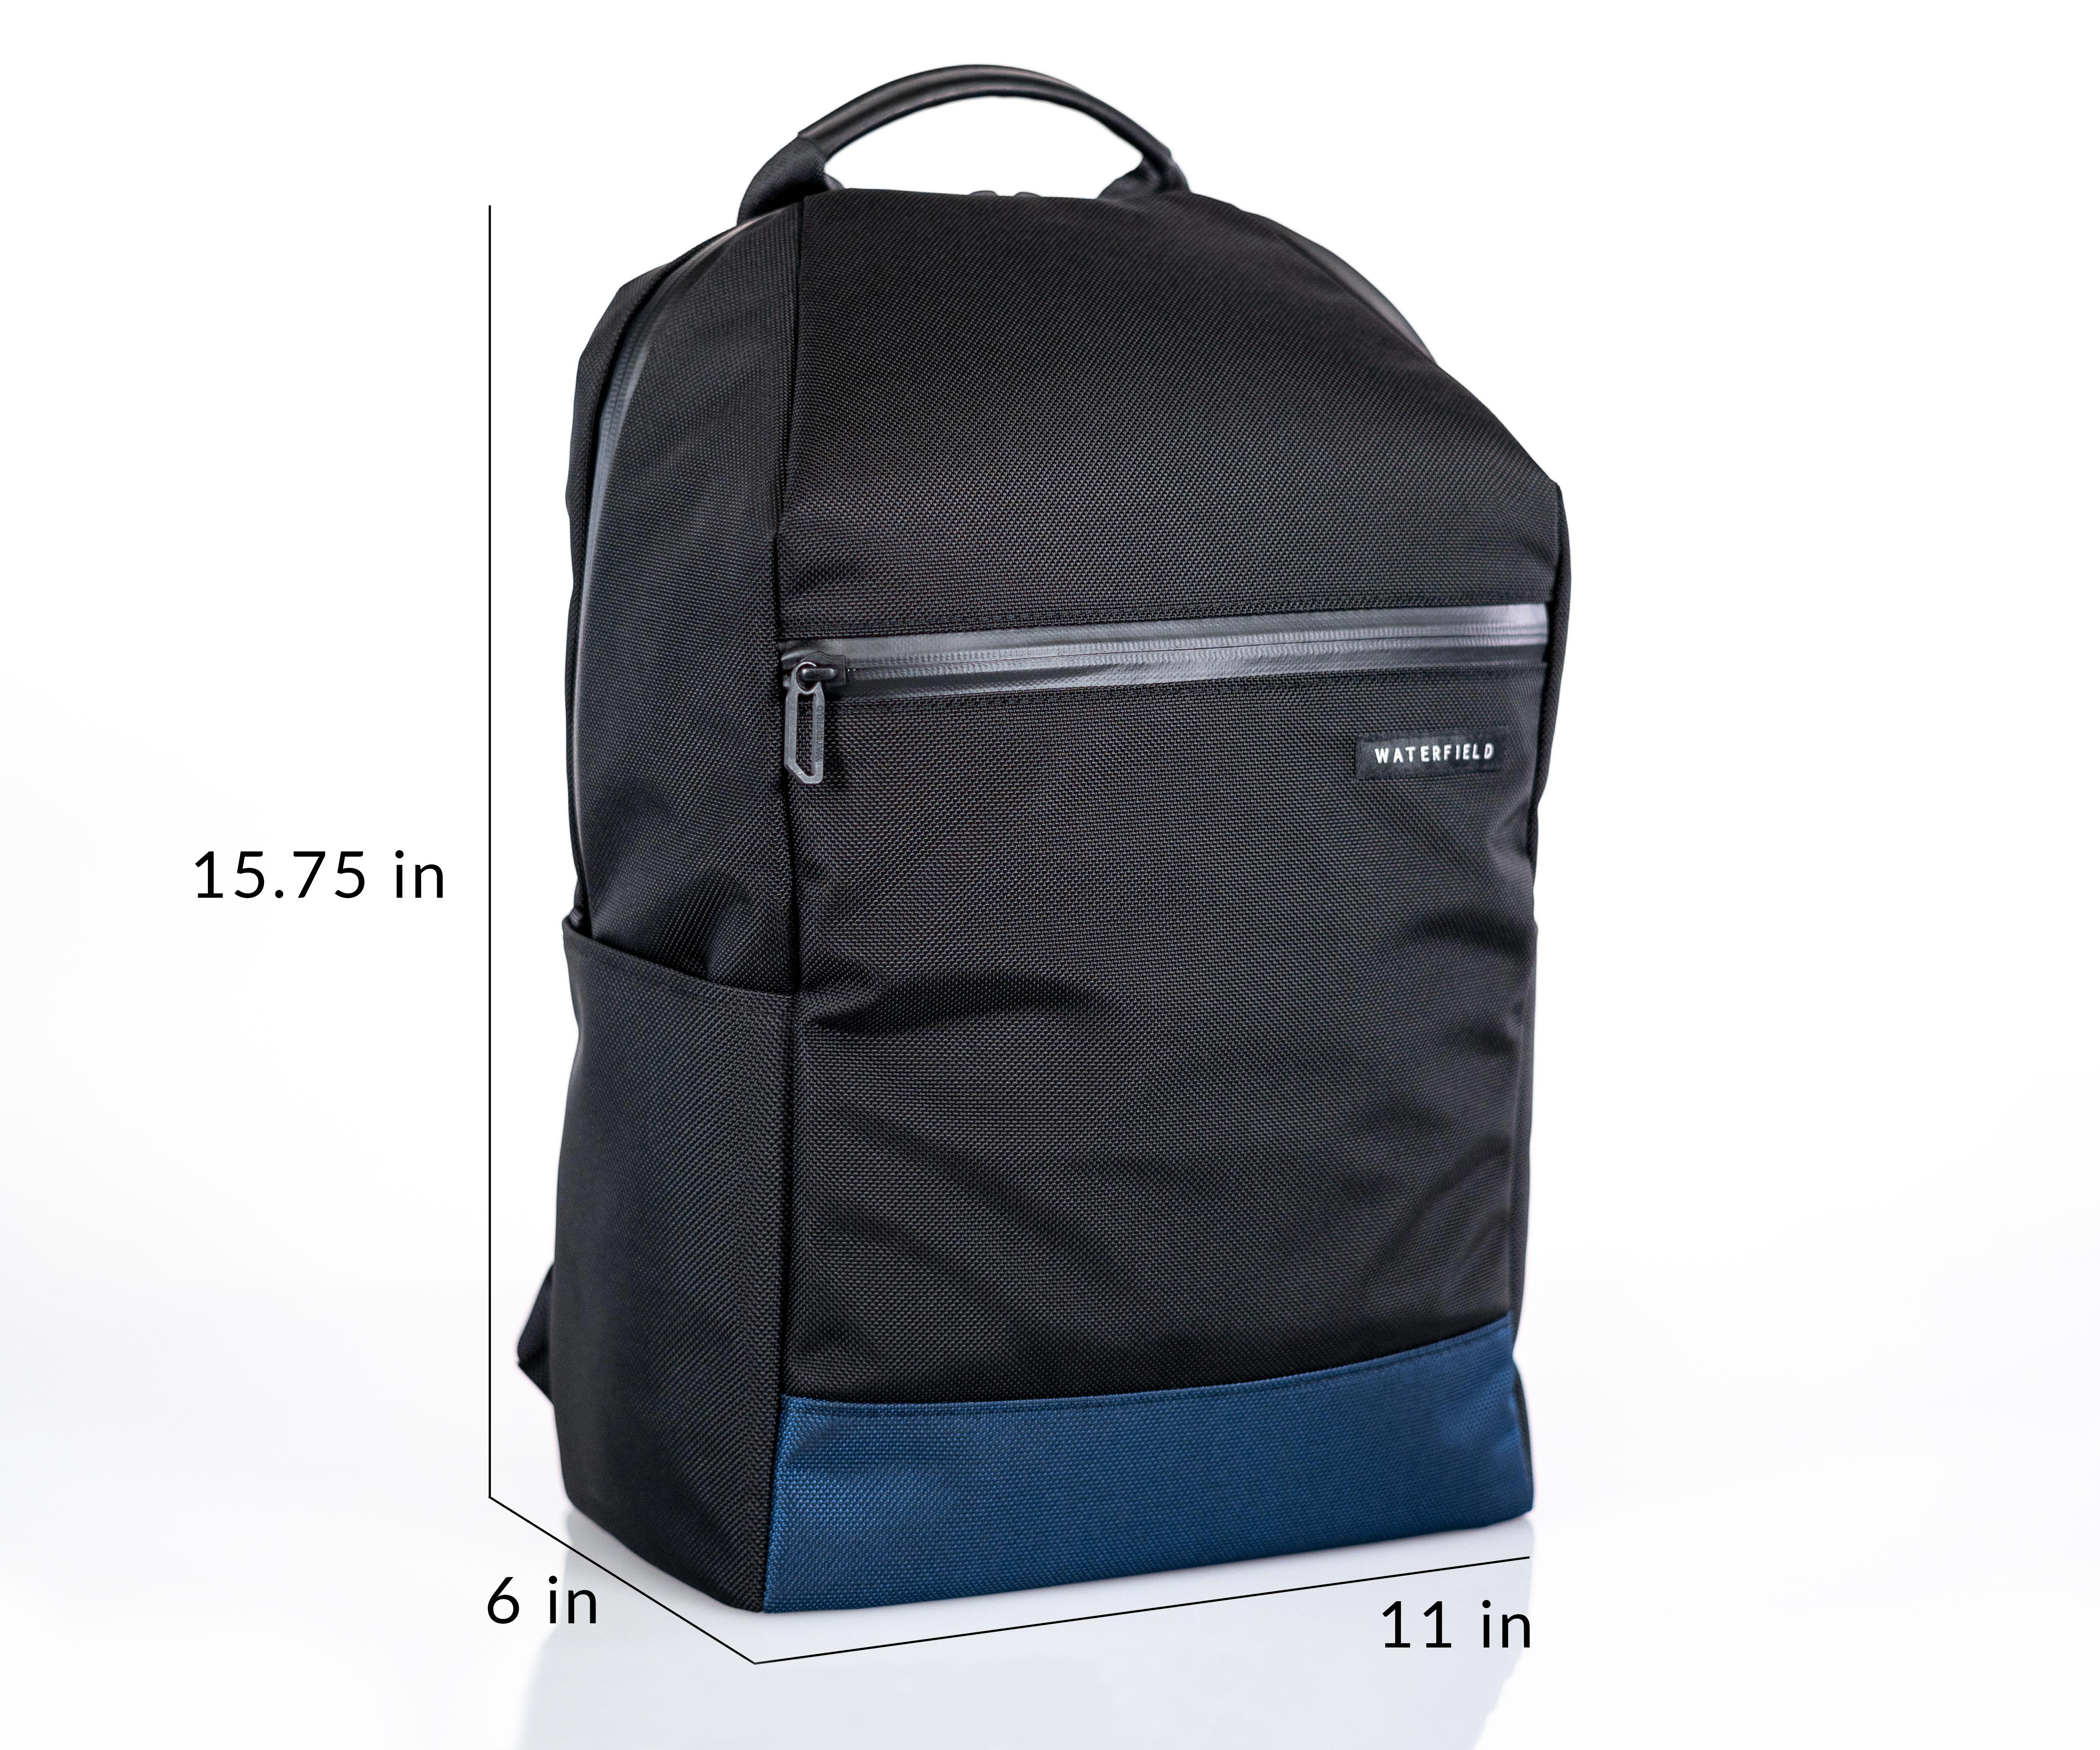 Essential Laptop Backpack dimensions